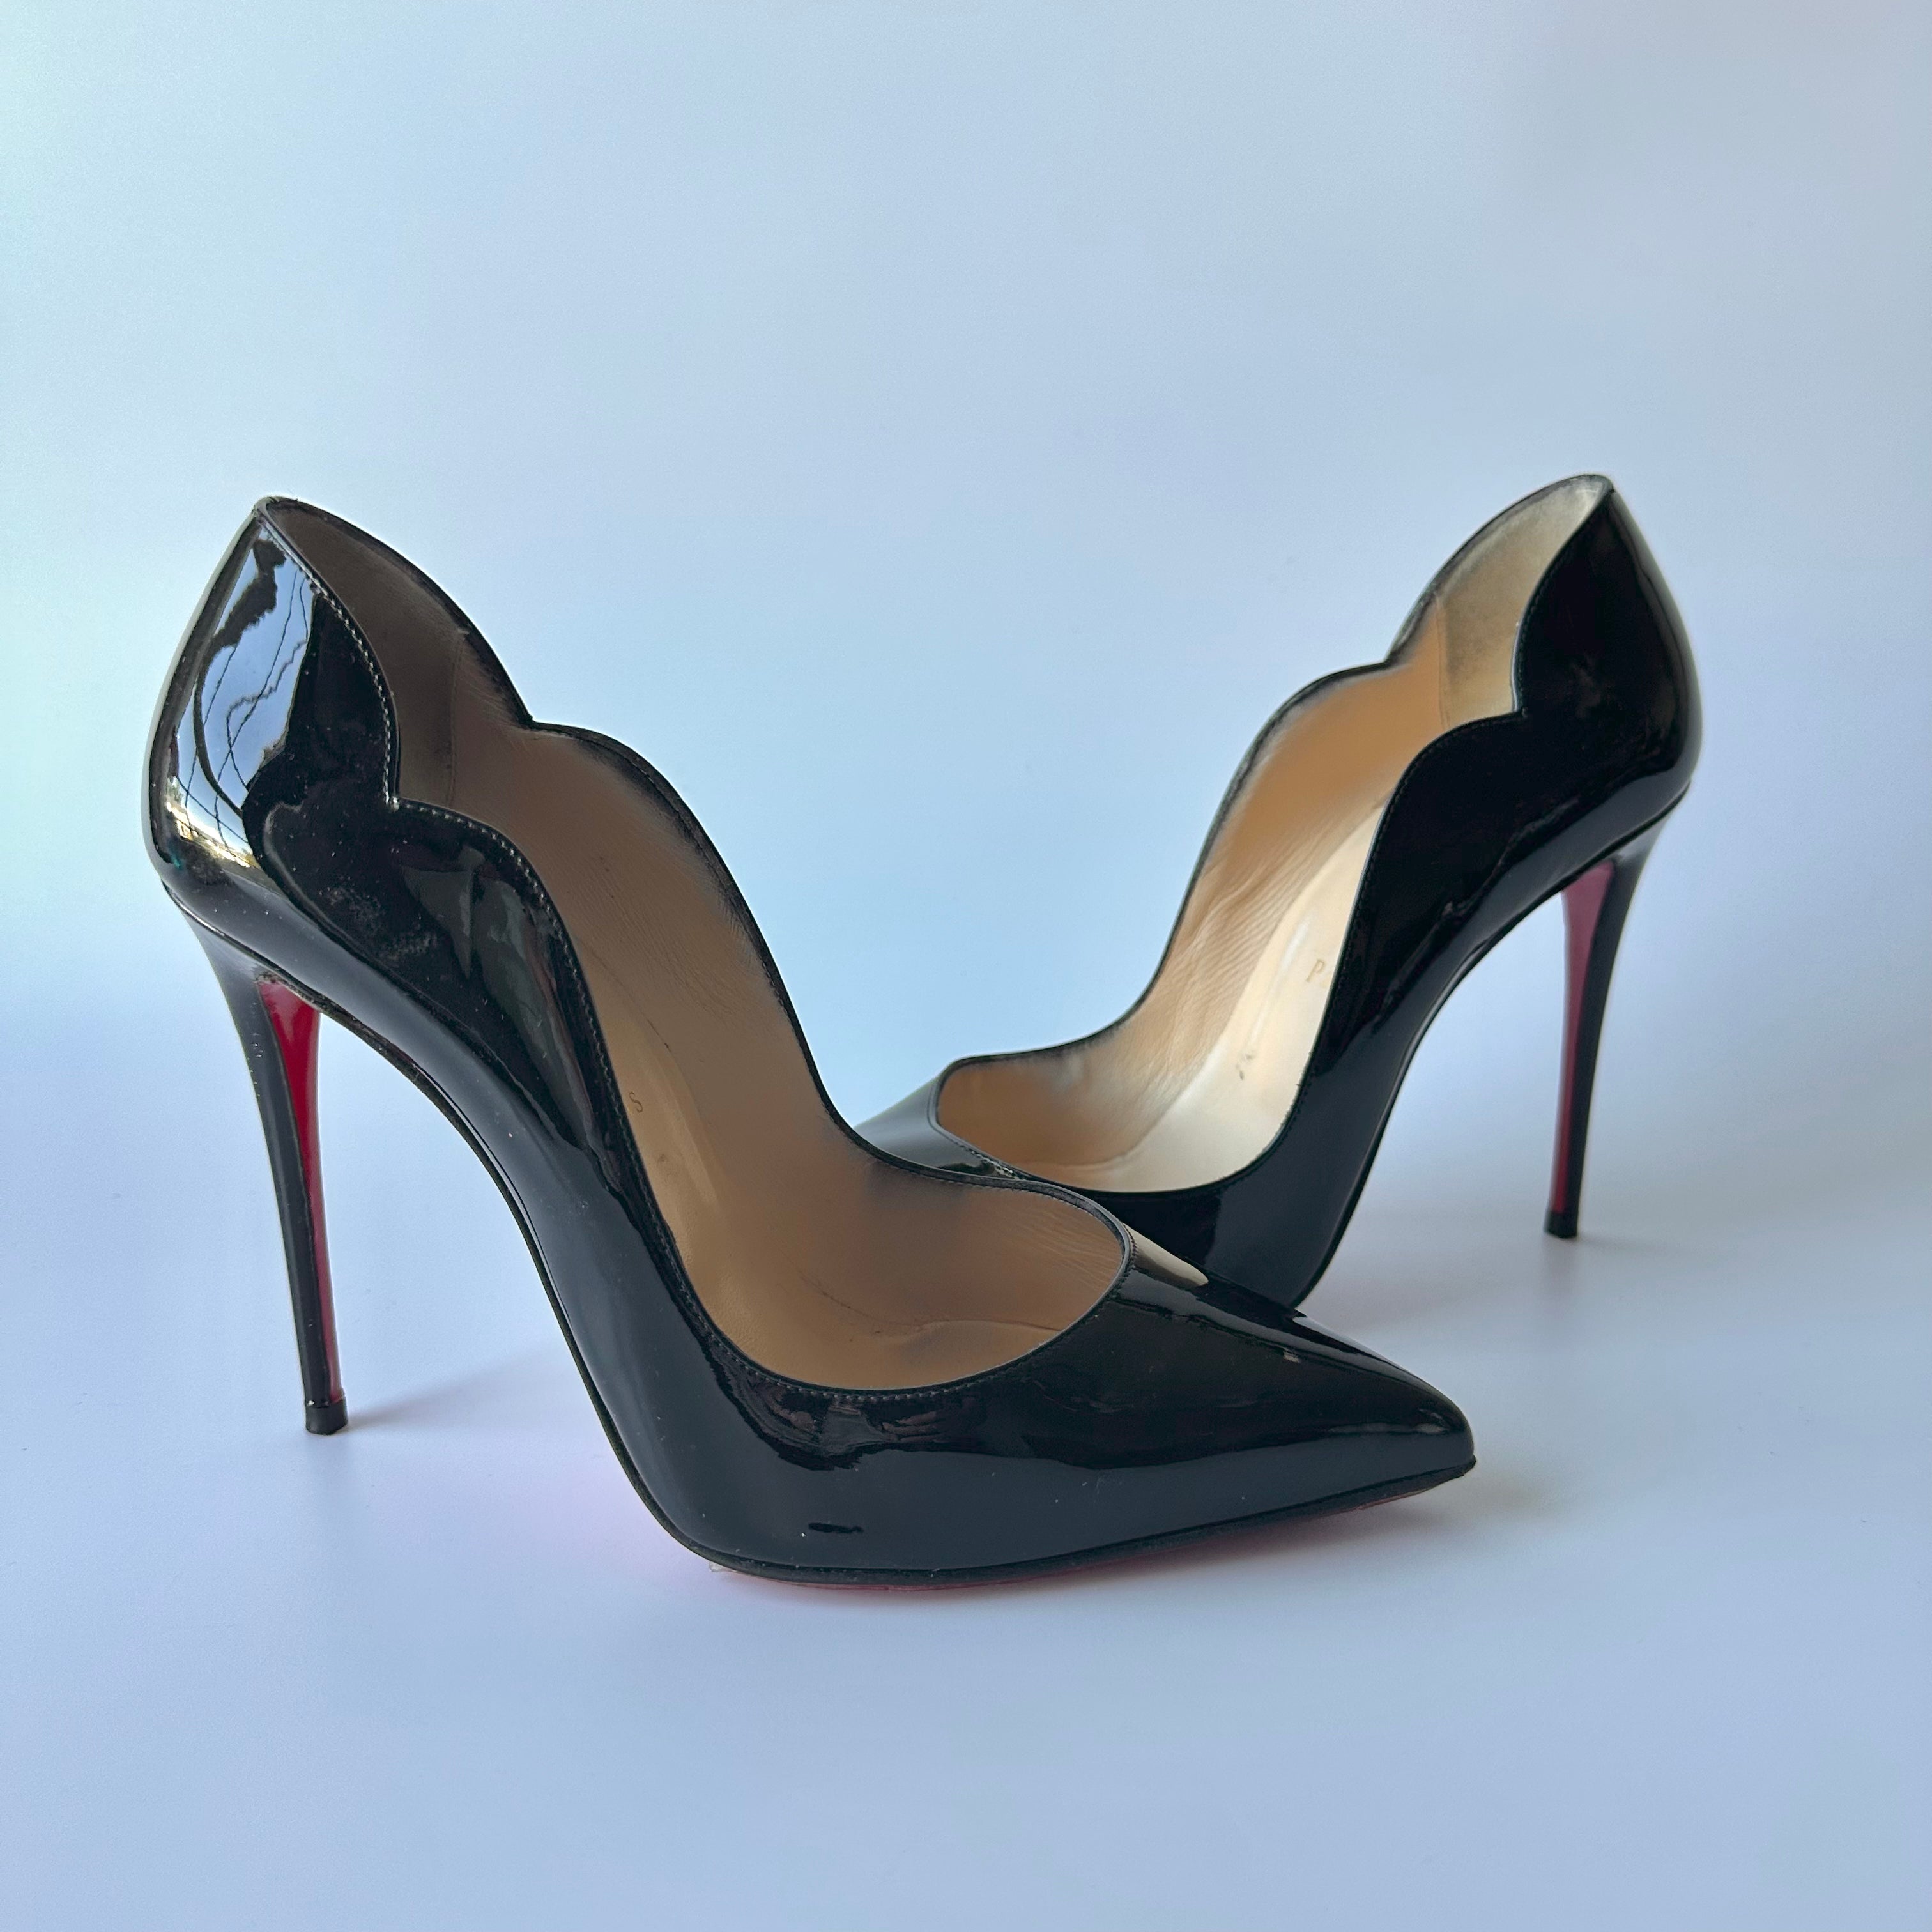 Christian Louboutin - Authenticated Heel - Crocodile Black for Women, Very Good Condition